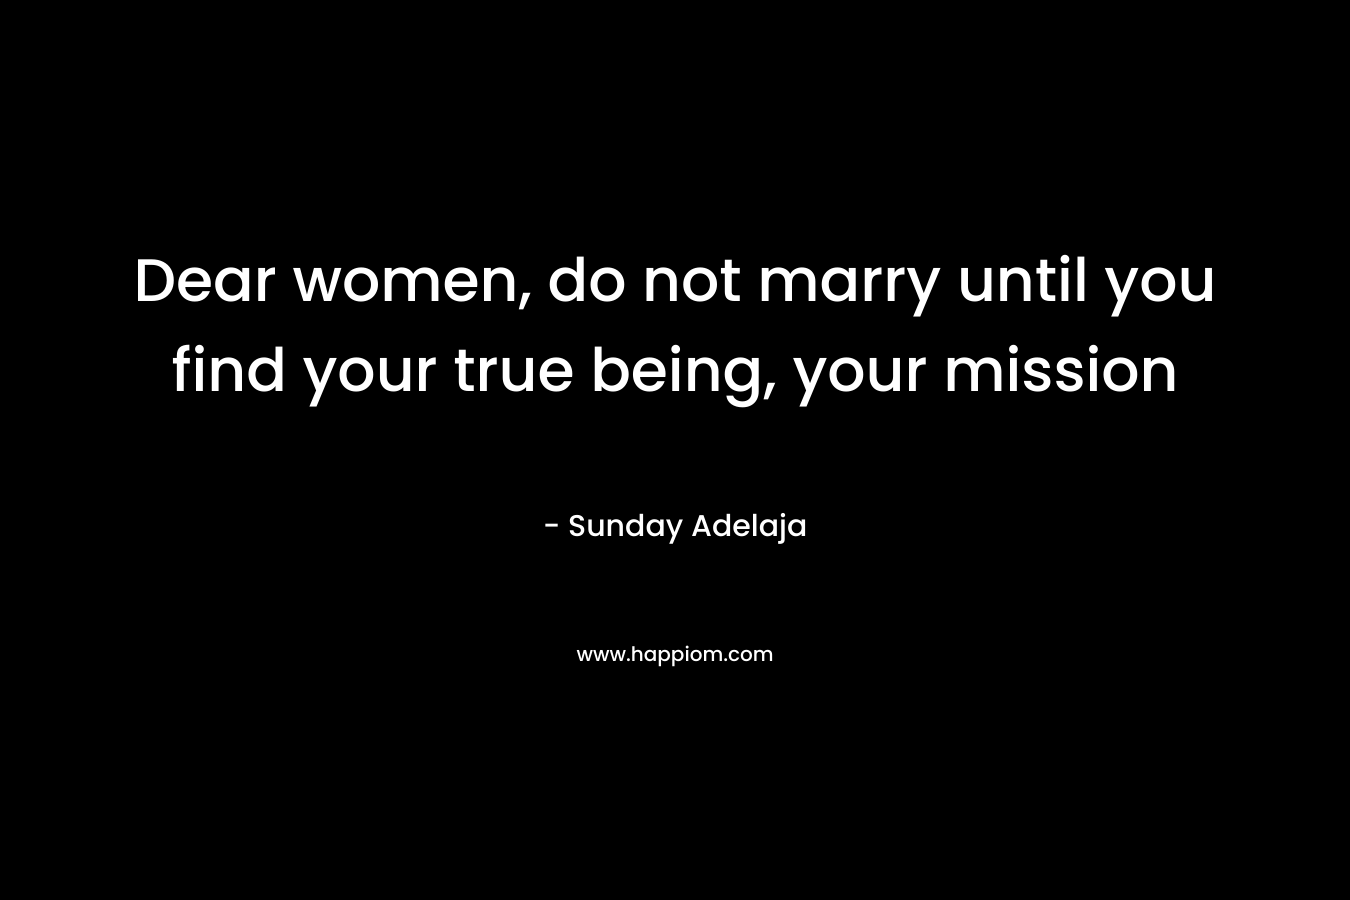 Dear women, do not marry until you find your true being, your mission